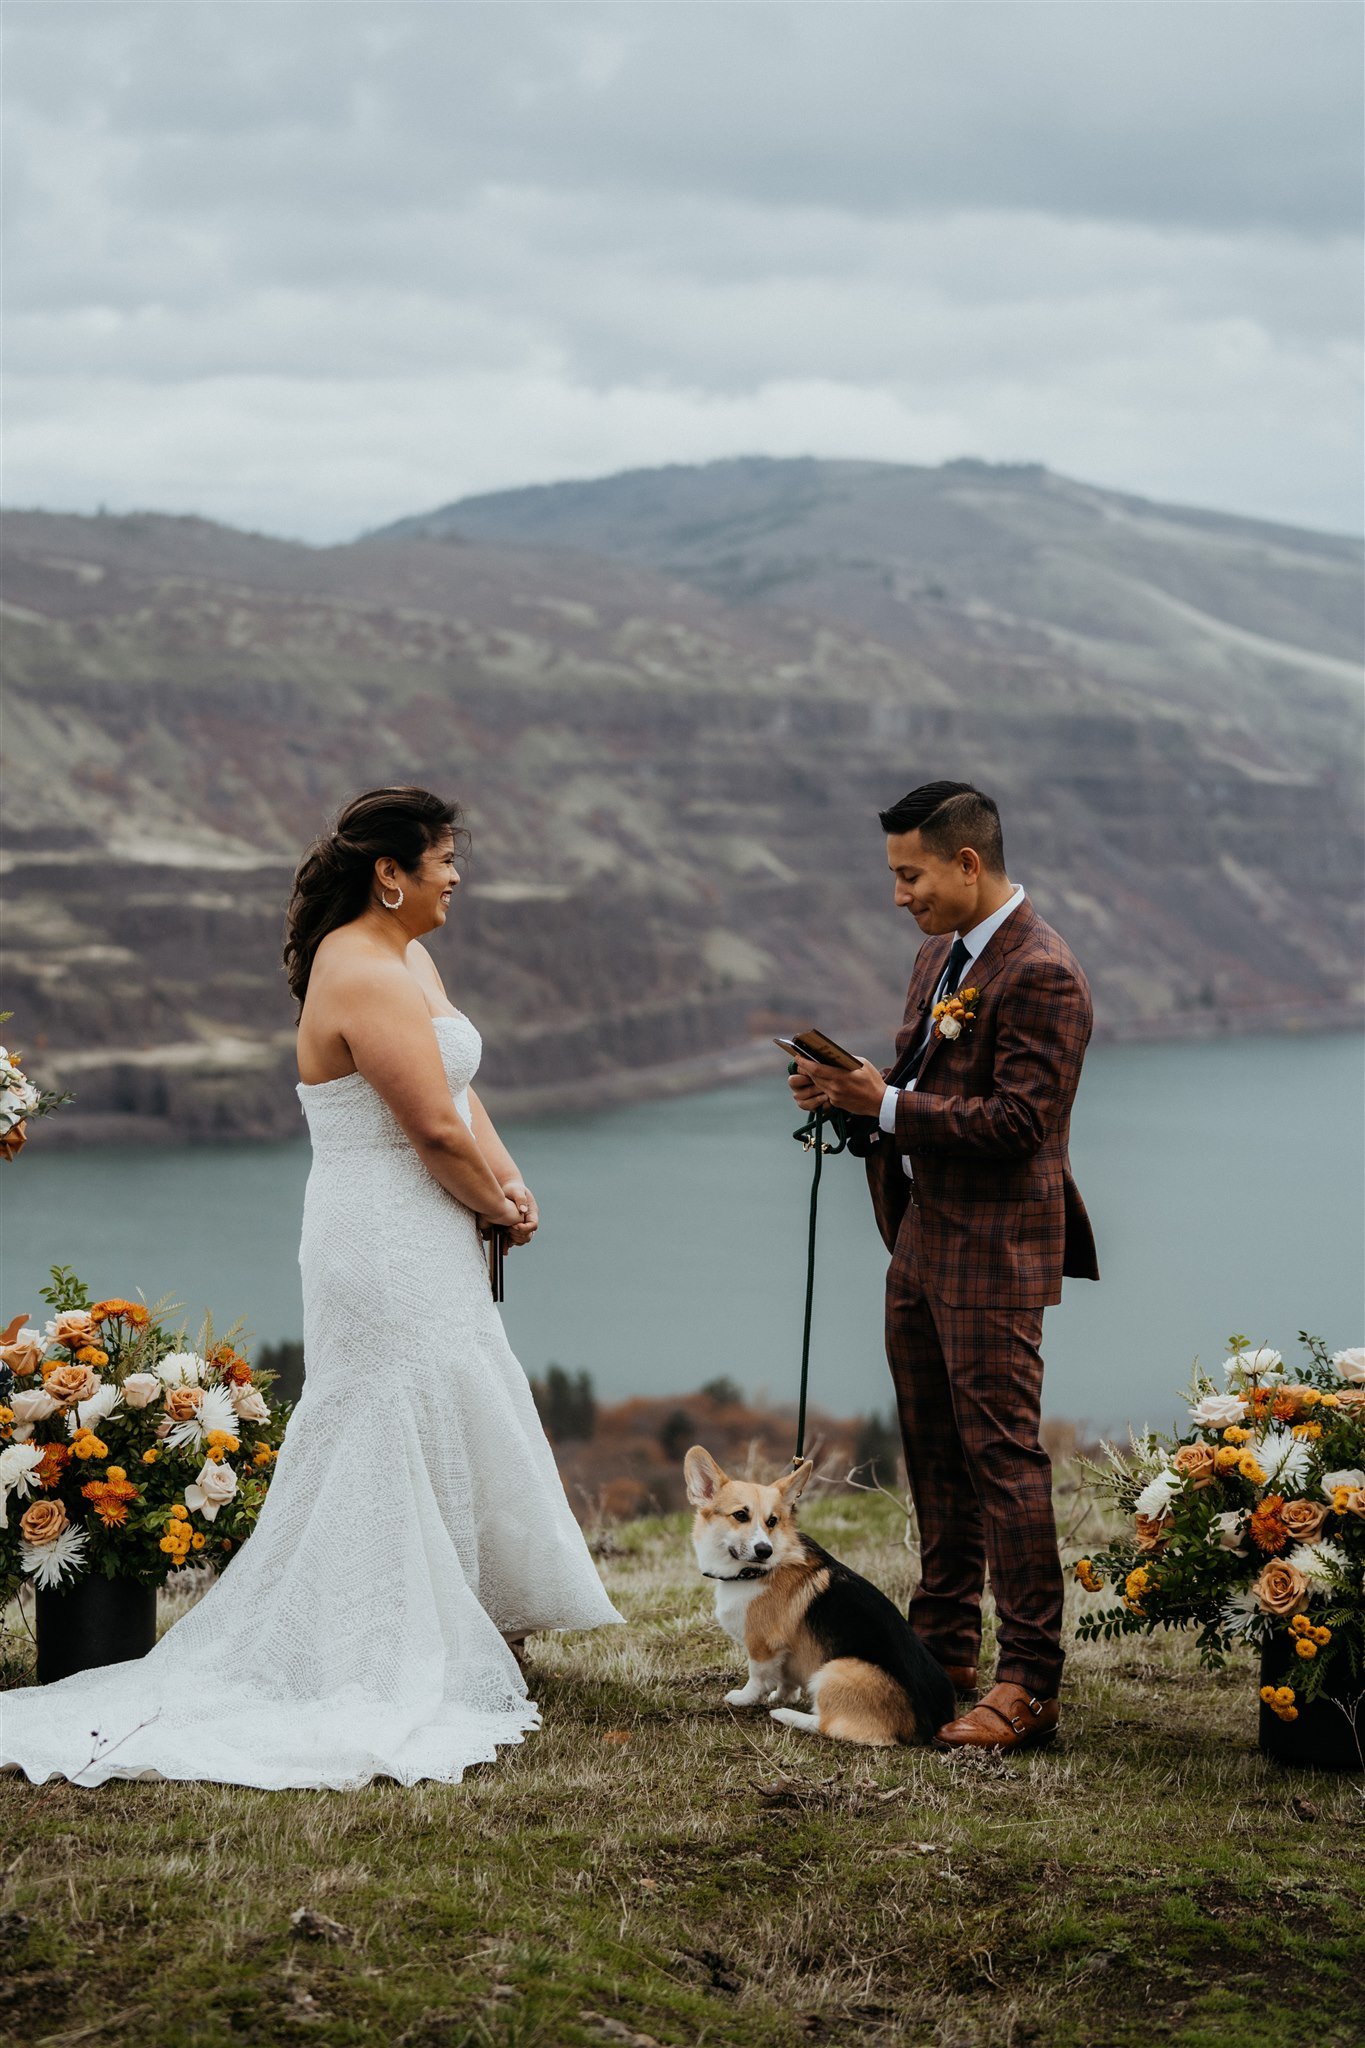 Groom reading vows to bride at Oregon elopement